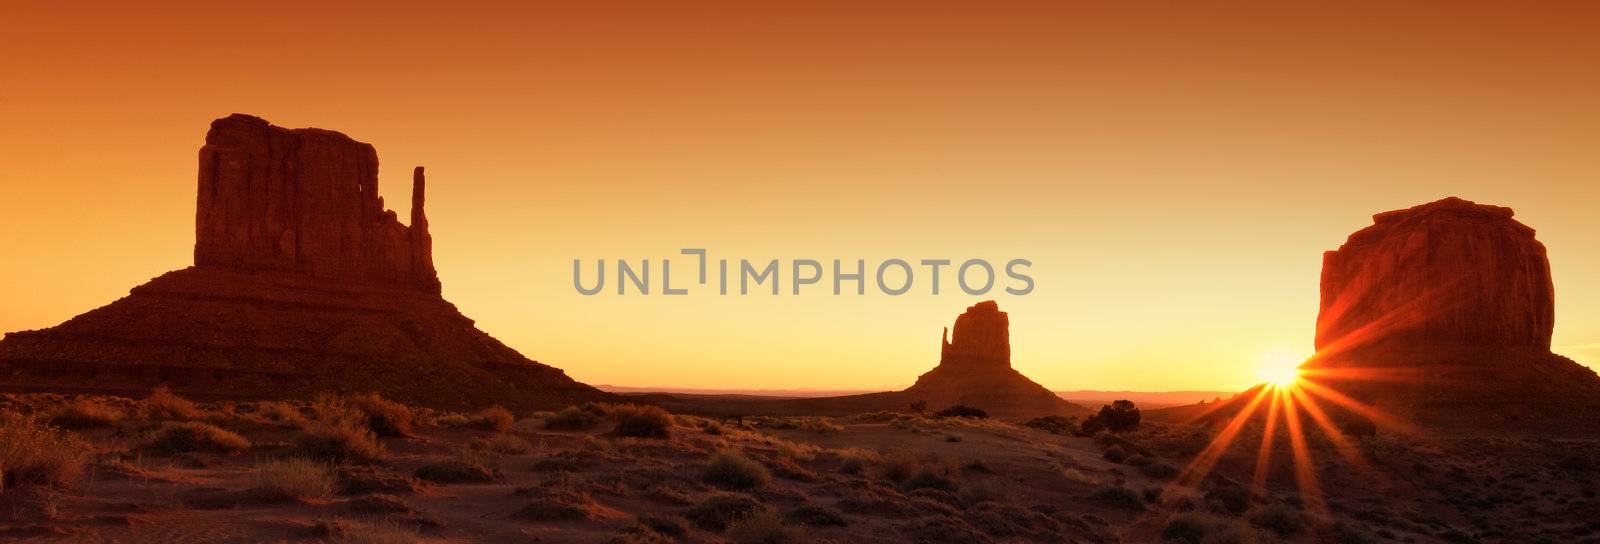 famous Monument Valley at sunrise by vwalakte